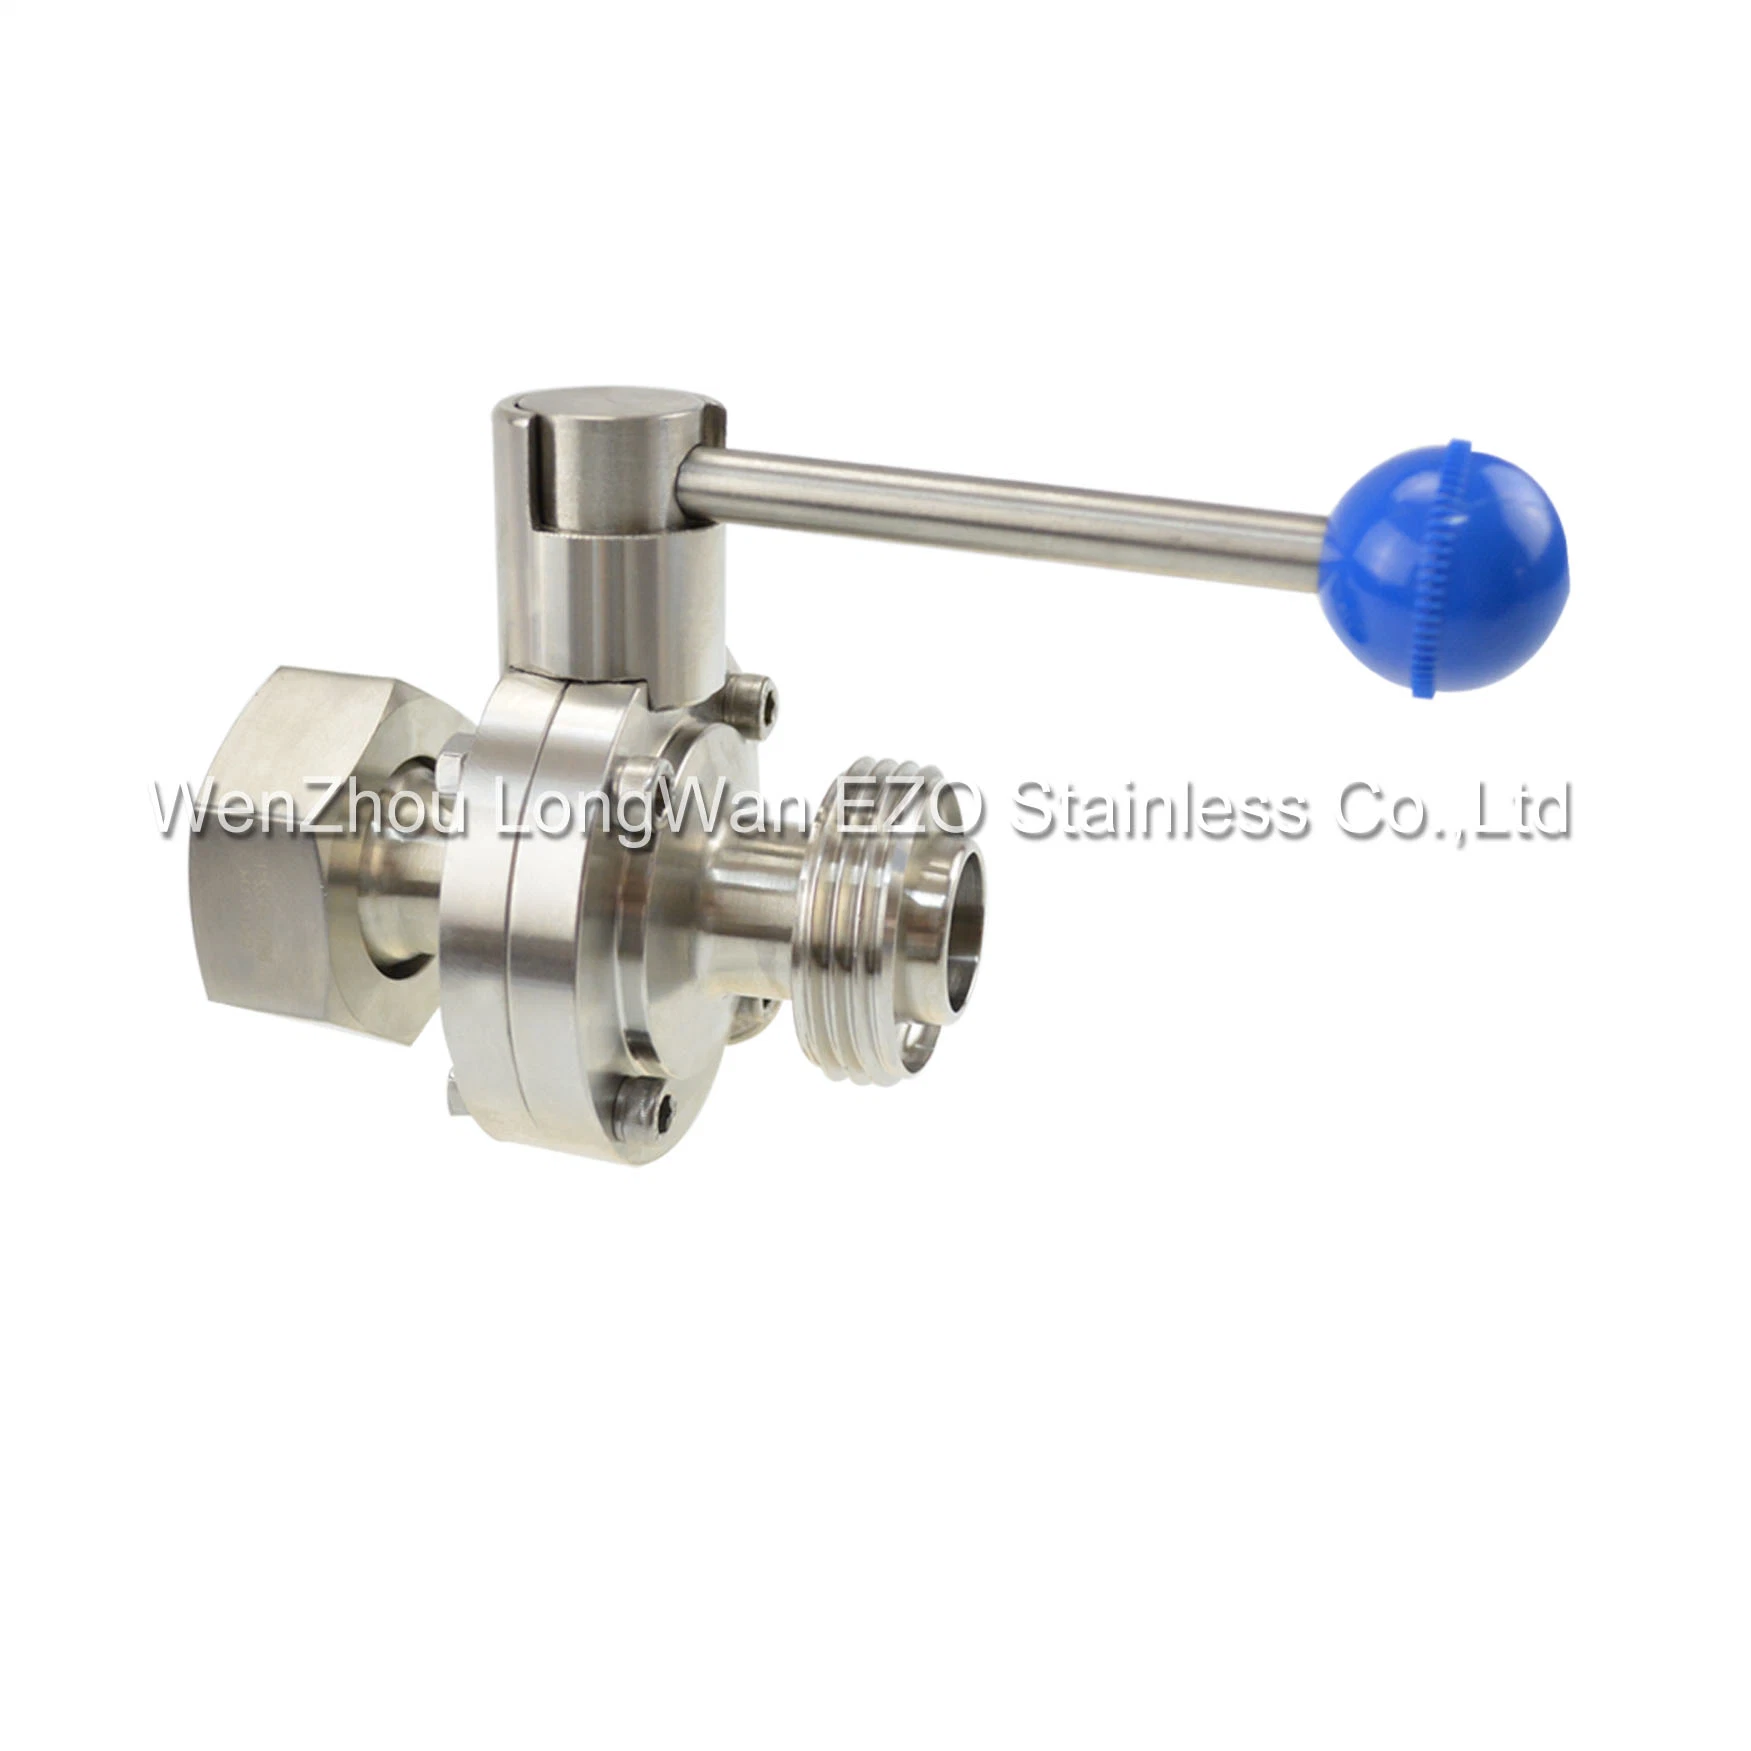 Stainless Steel Food Processing Manual Clamped Butterfly Valves with Round Handle (JN-BV 1008)